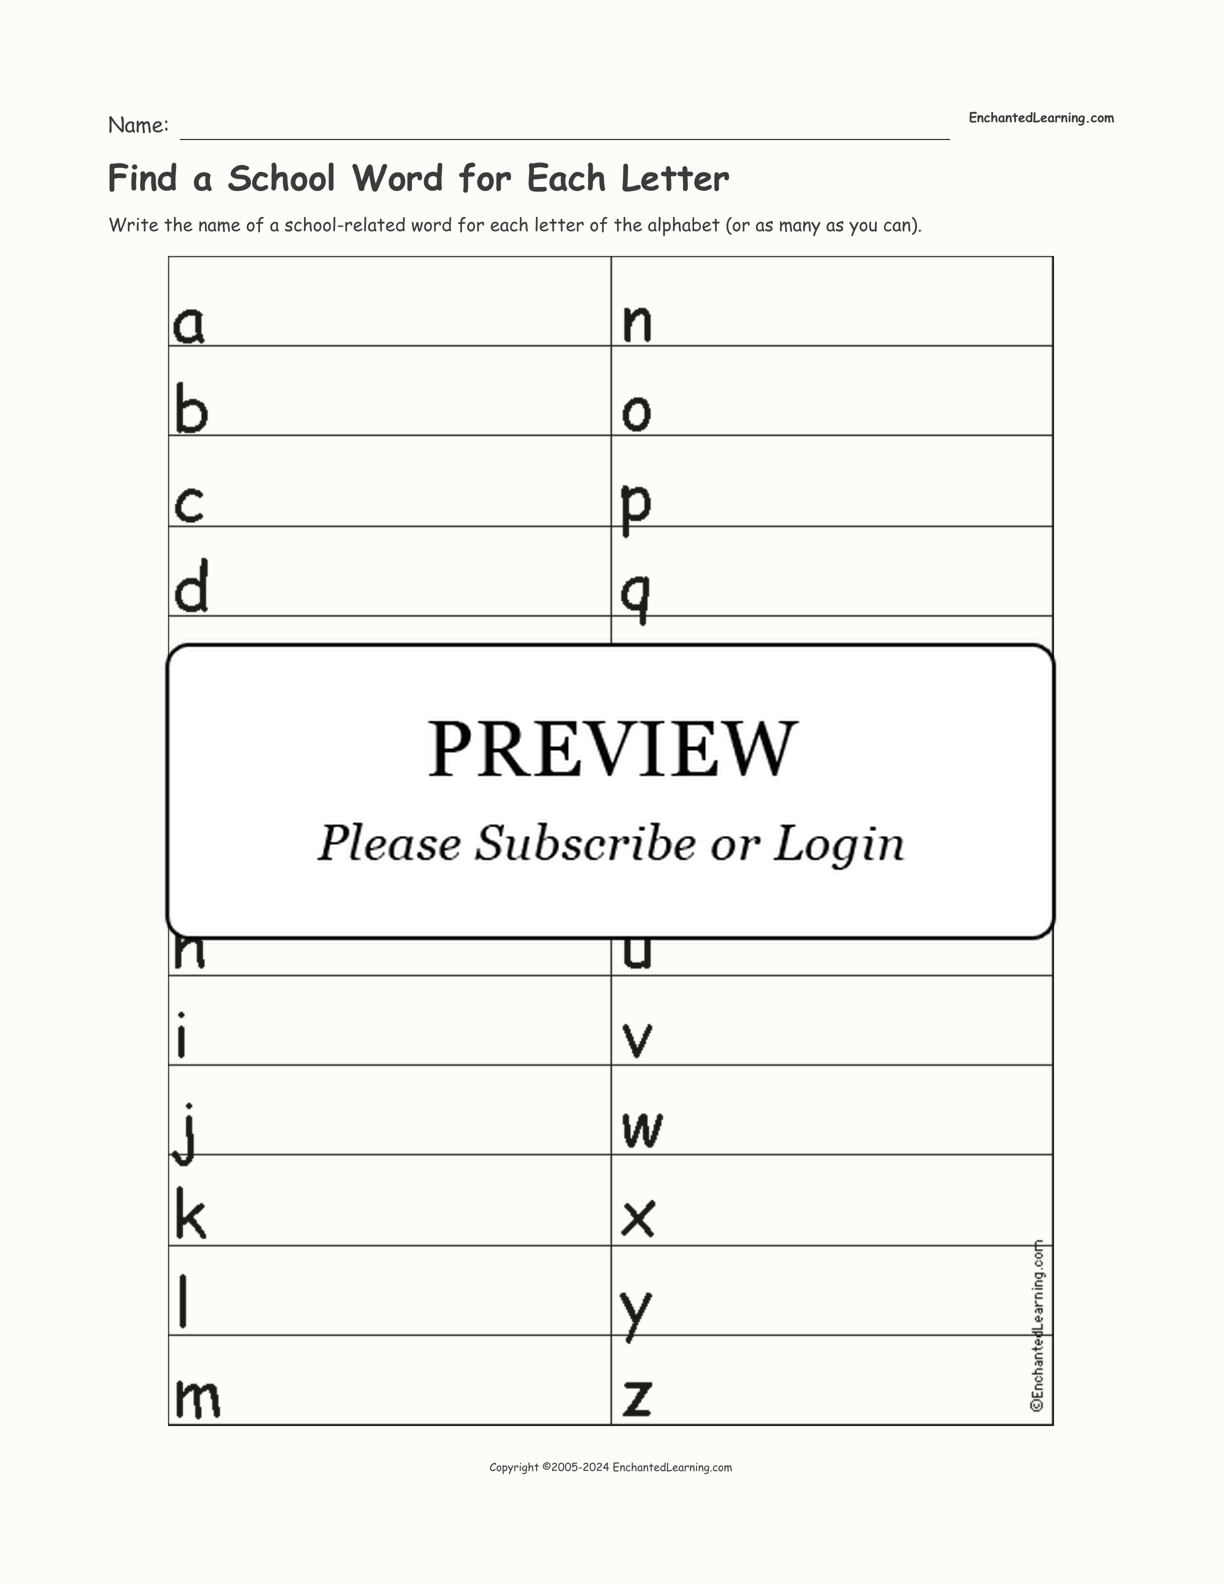 Find a School Word for Each Letter interactive worksheet page 1